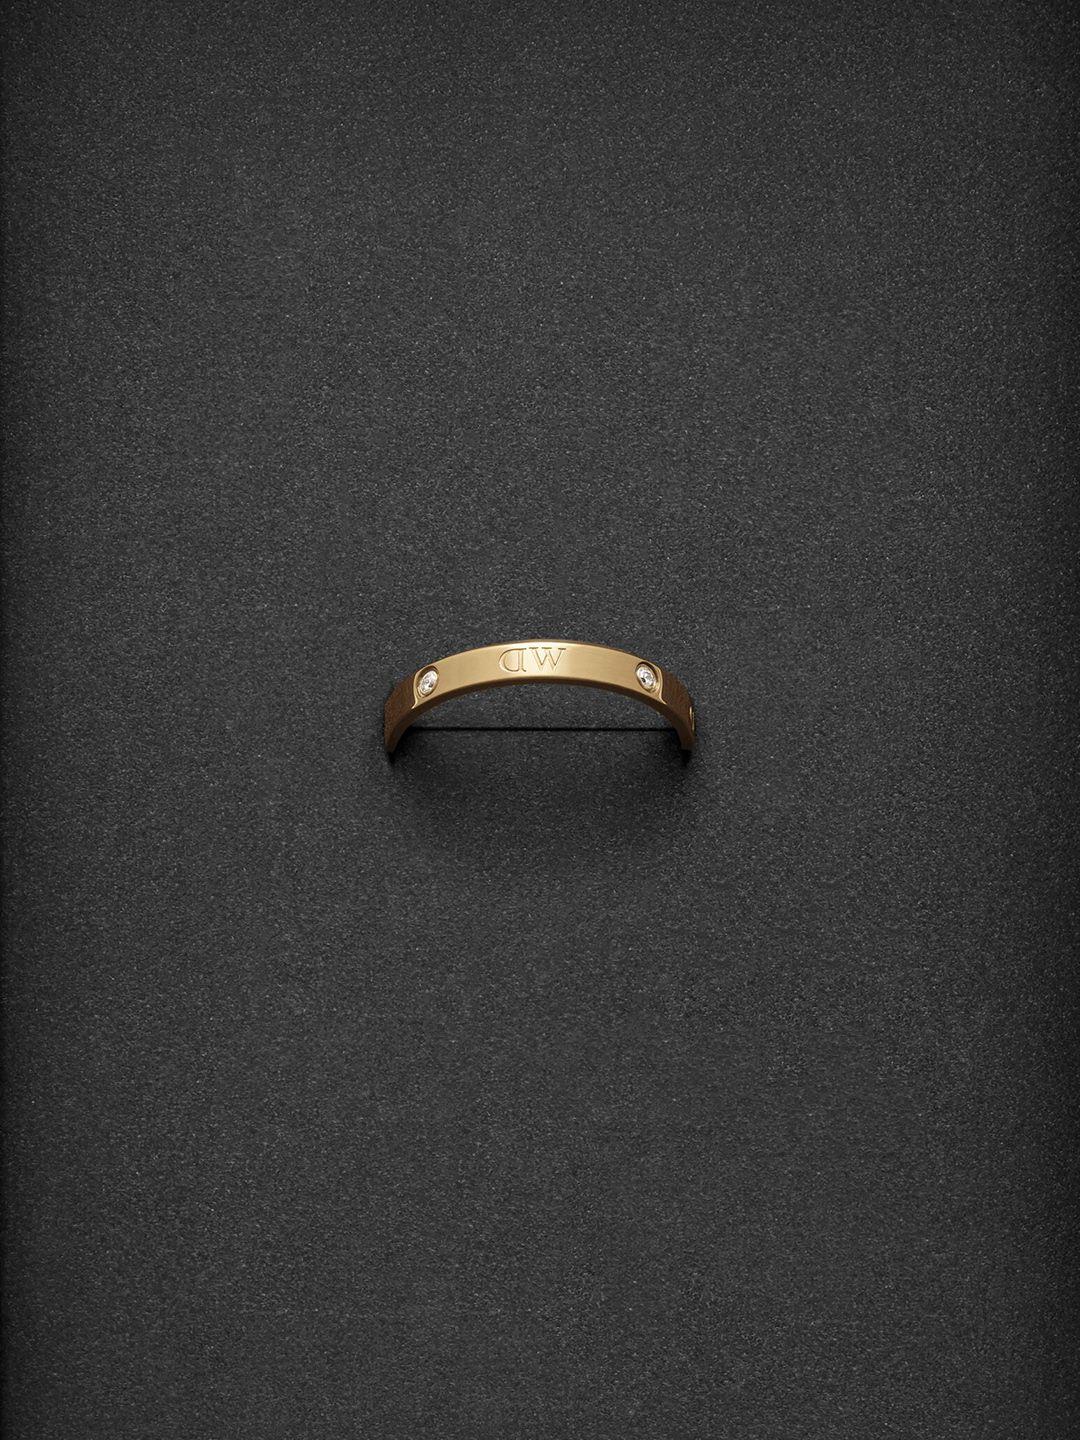 daniel wellington gold-plated stone-studded ring